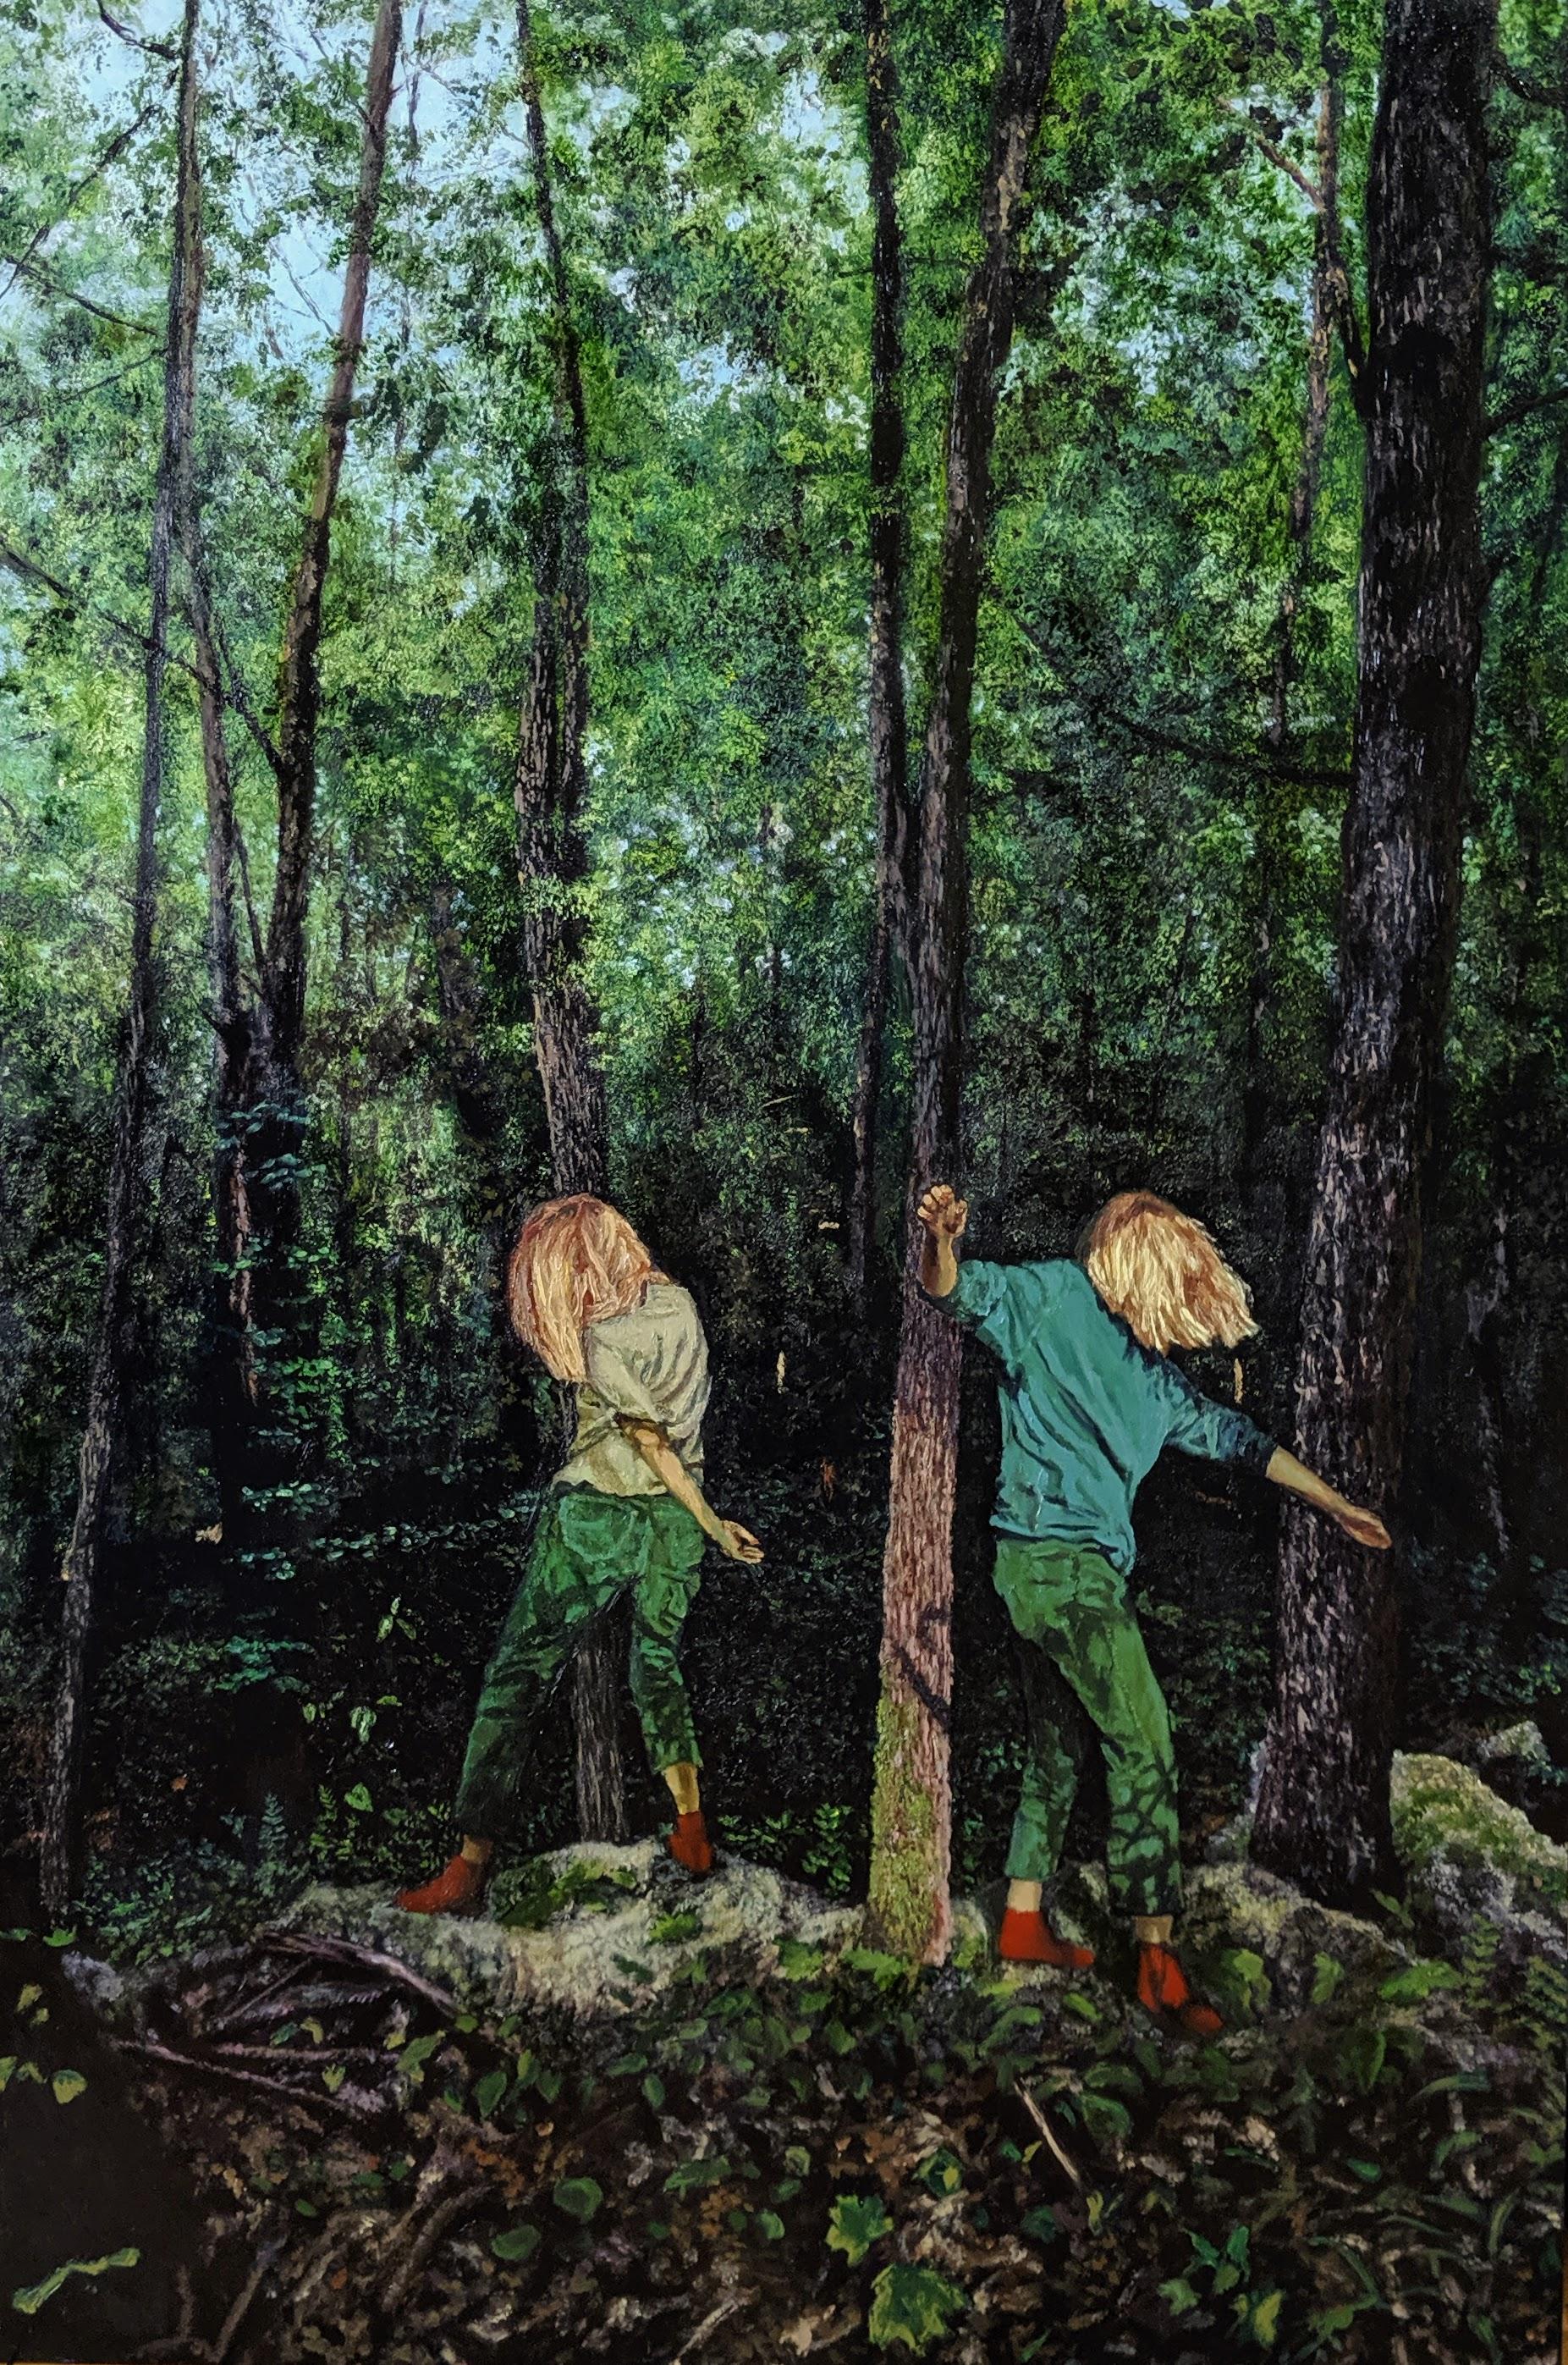 Surrealist style figurative painting of two young blonde girls dancing in an evergreen forest landscape 
"Secret Song" by Hudson Valley based artist Annika Tucksmith
oil on panel, 36 x 24 x 2 inches
Sides are painted black so additional framing is